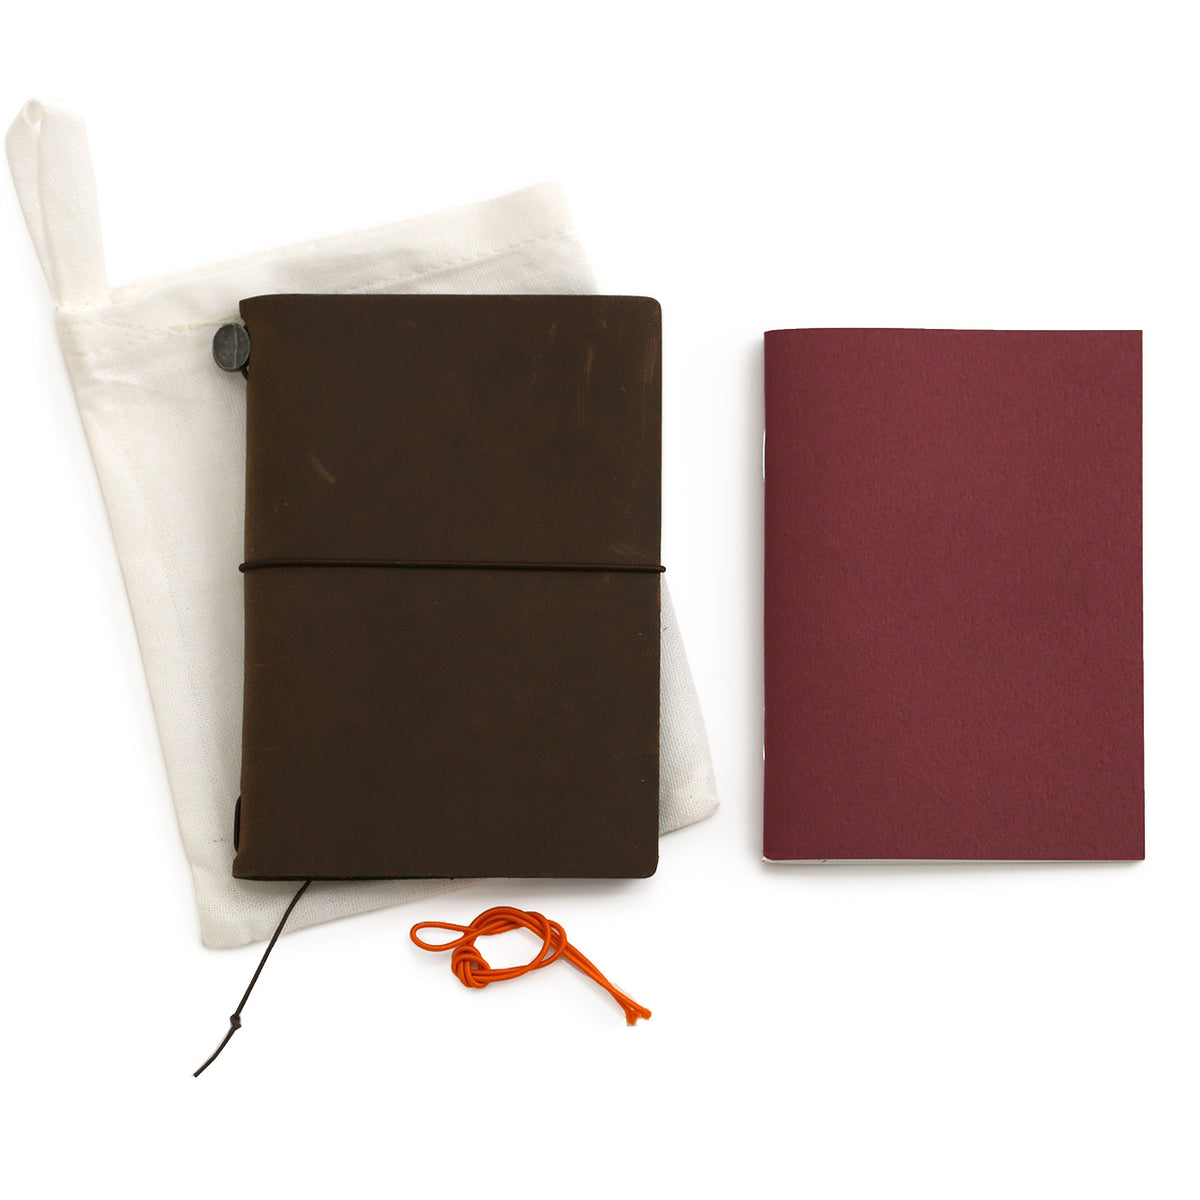 Brown leather notebook in passport size with the blank notebook which fits inside, an extra orange elastic and the cotton bag